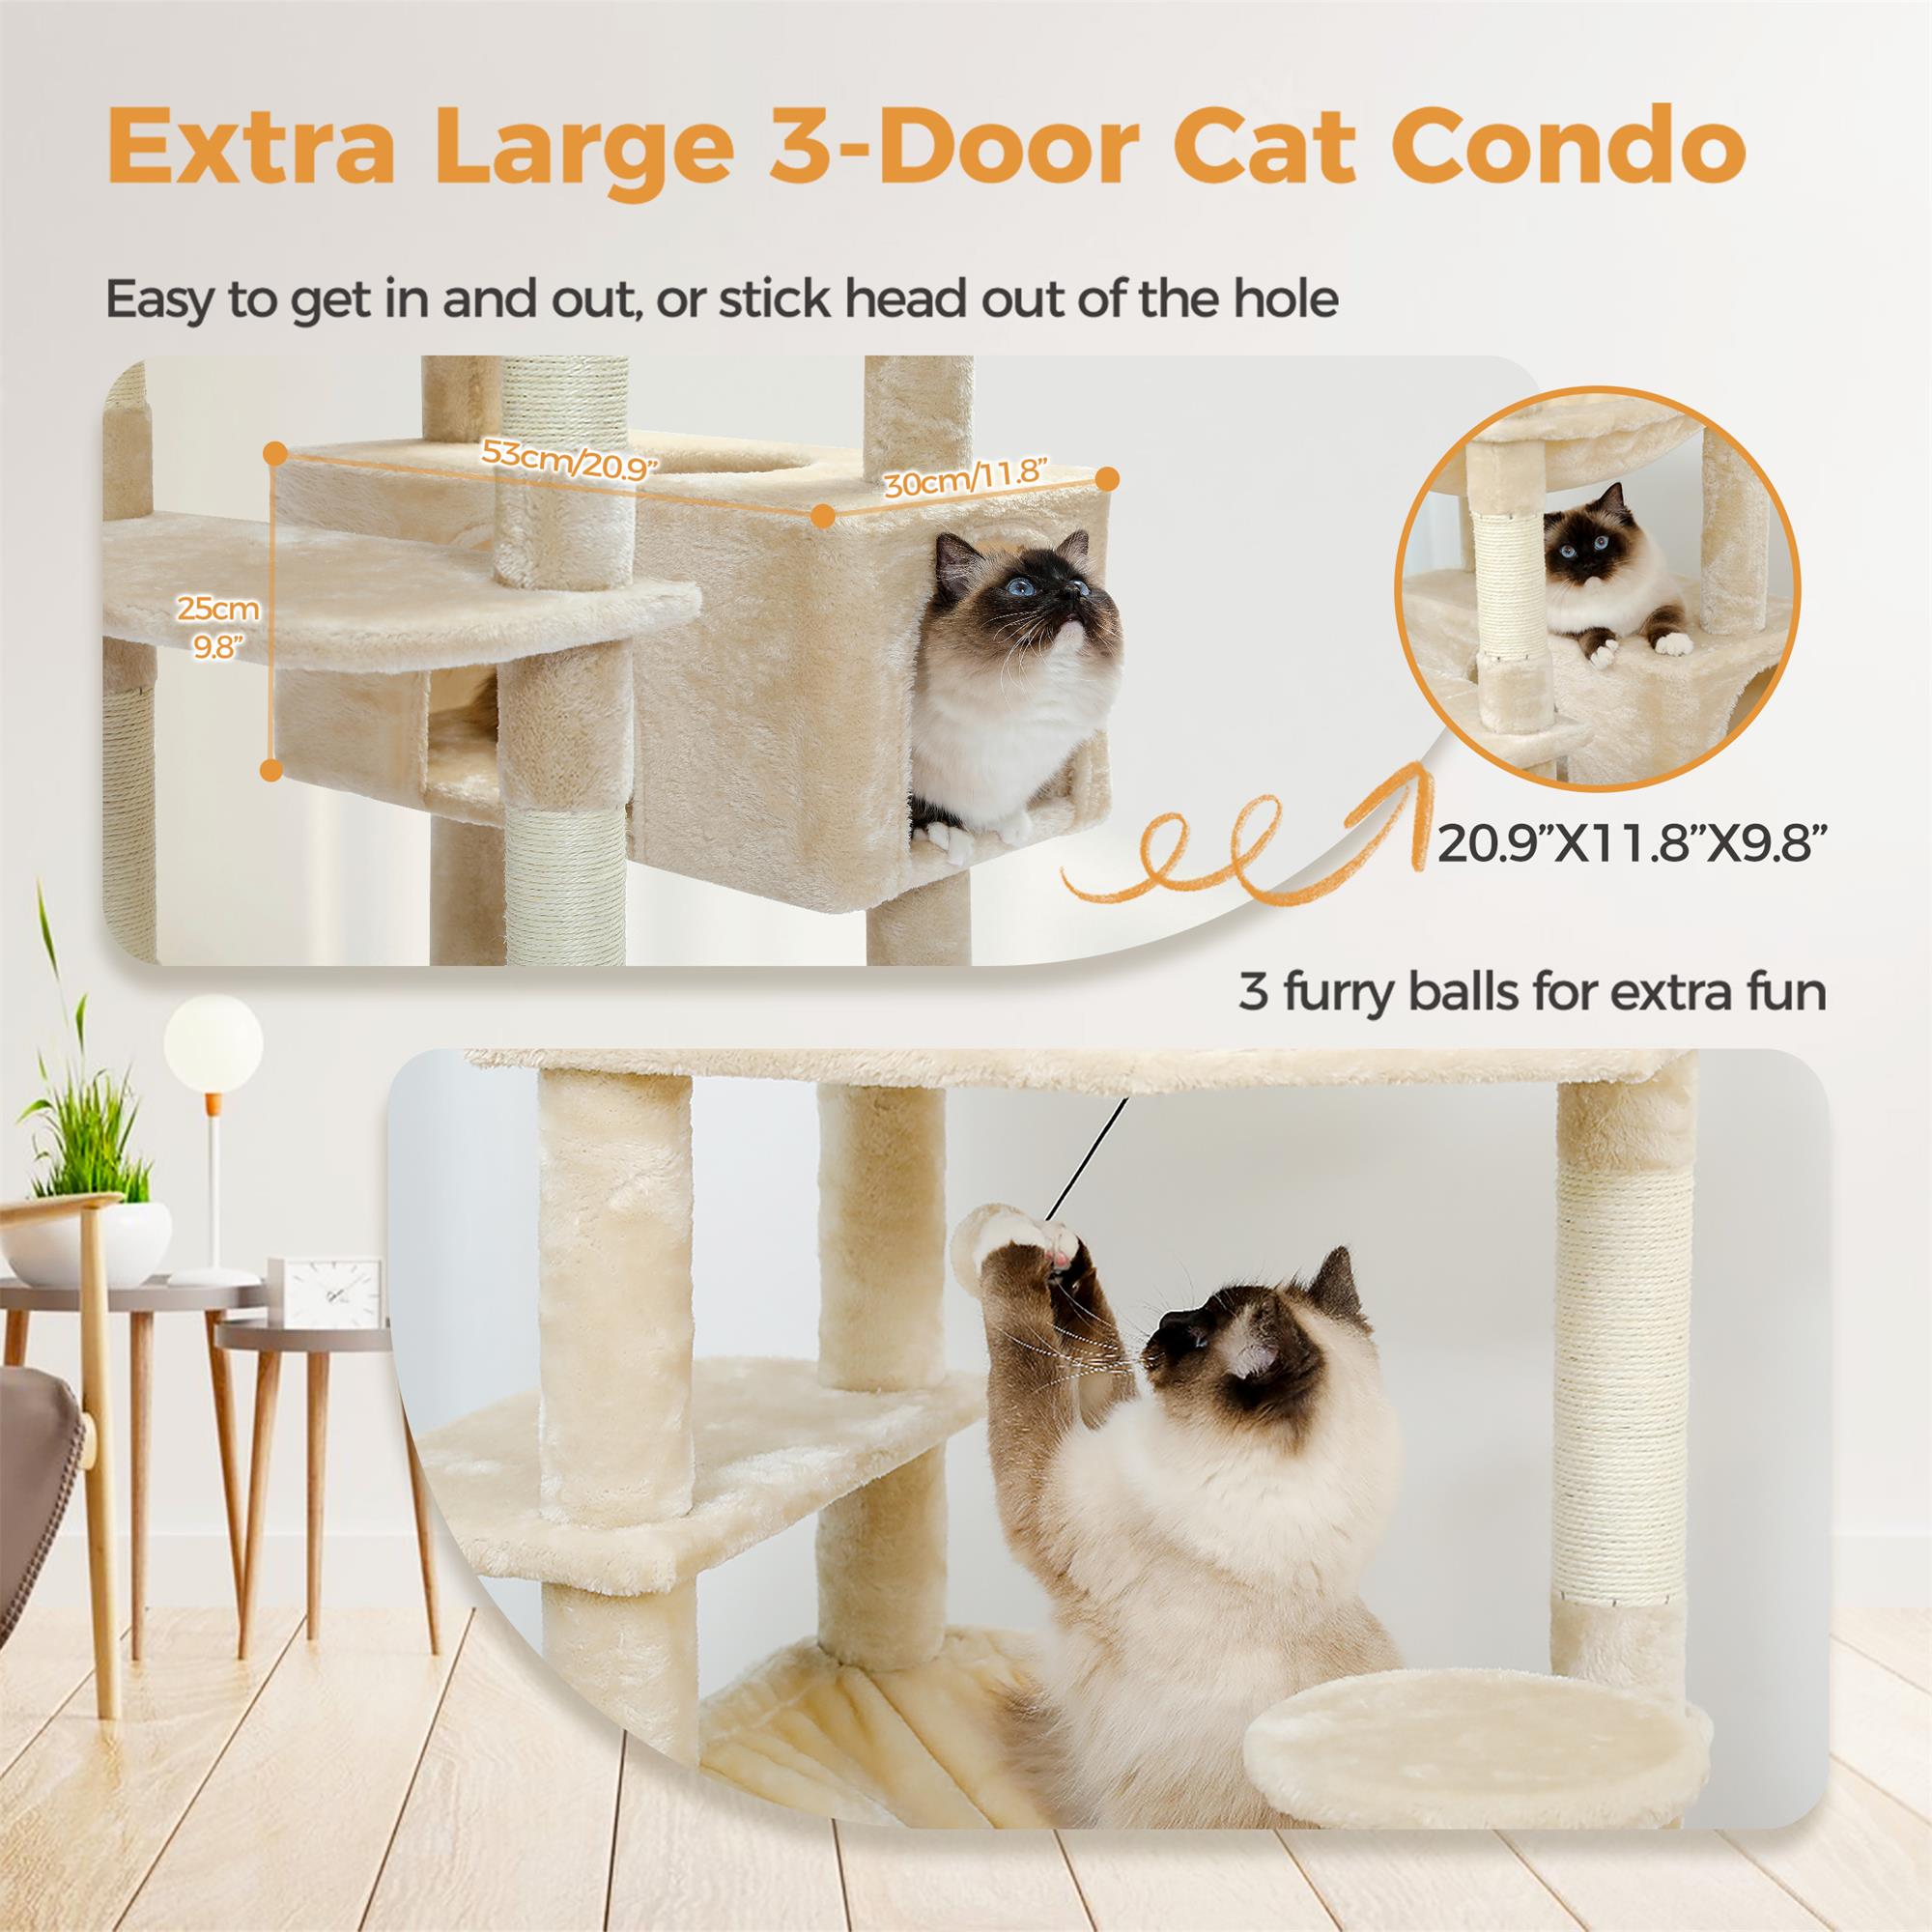 Pefilos 72" Large Cat Tree Tower with Sisal Scratching Post, Indoor Cat Condo for Big Cat Maine Coon, Beige